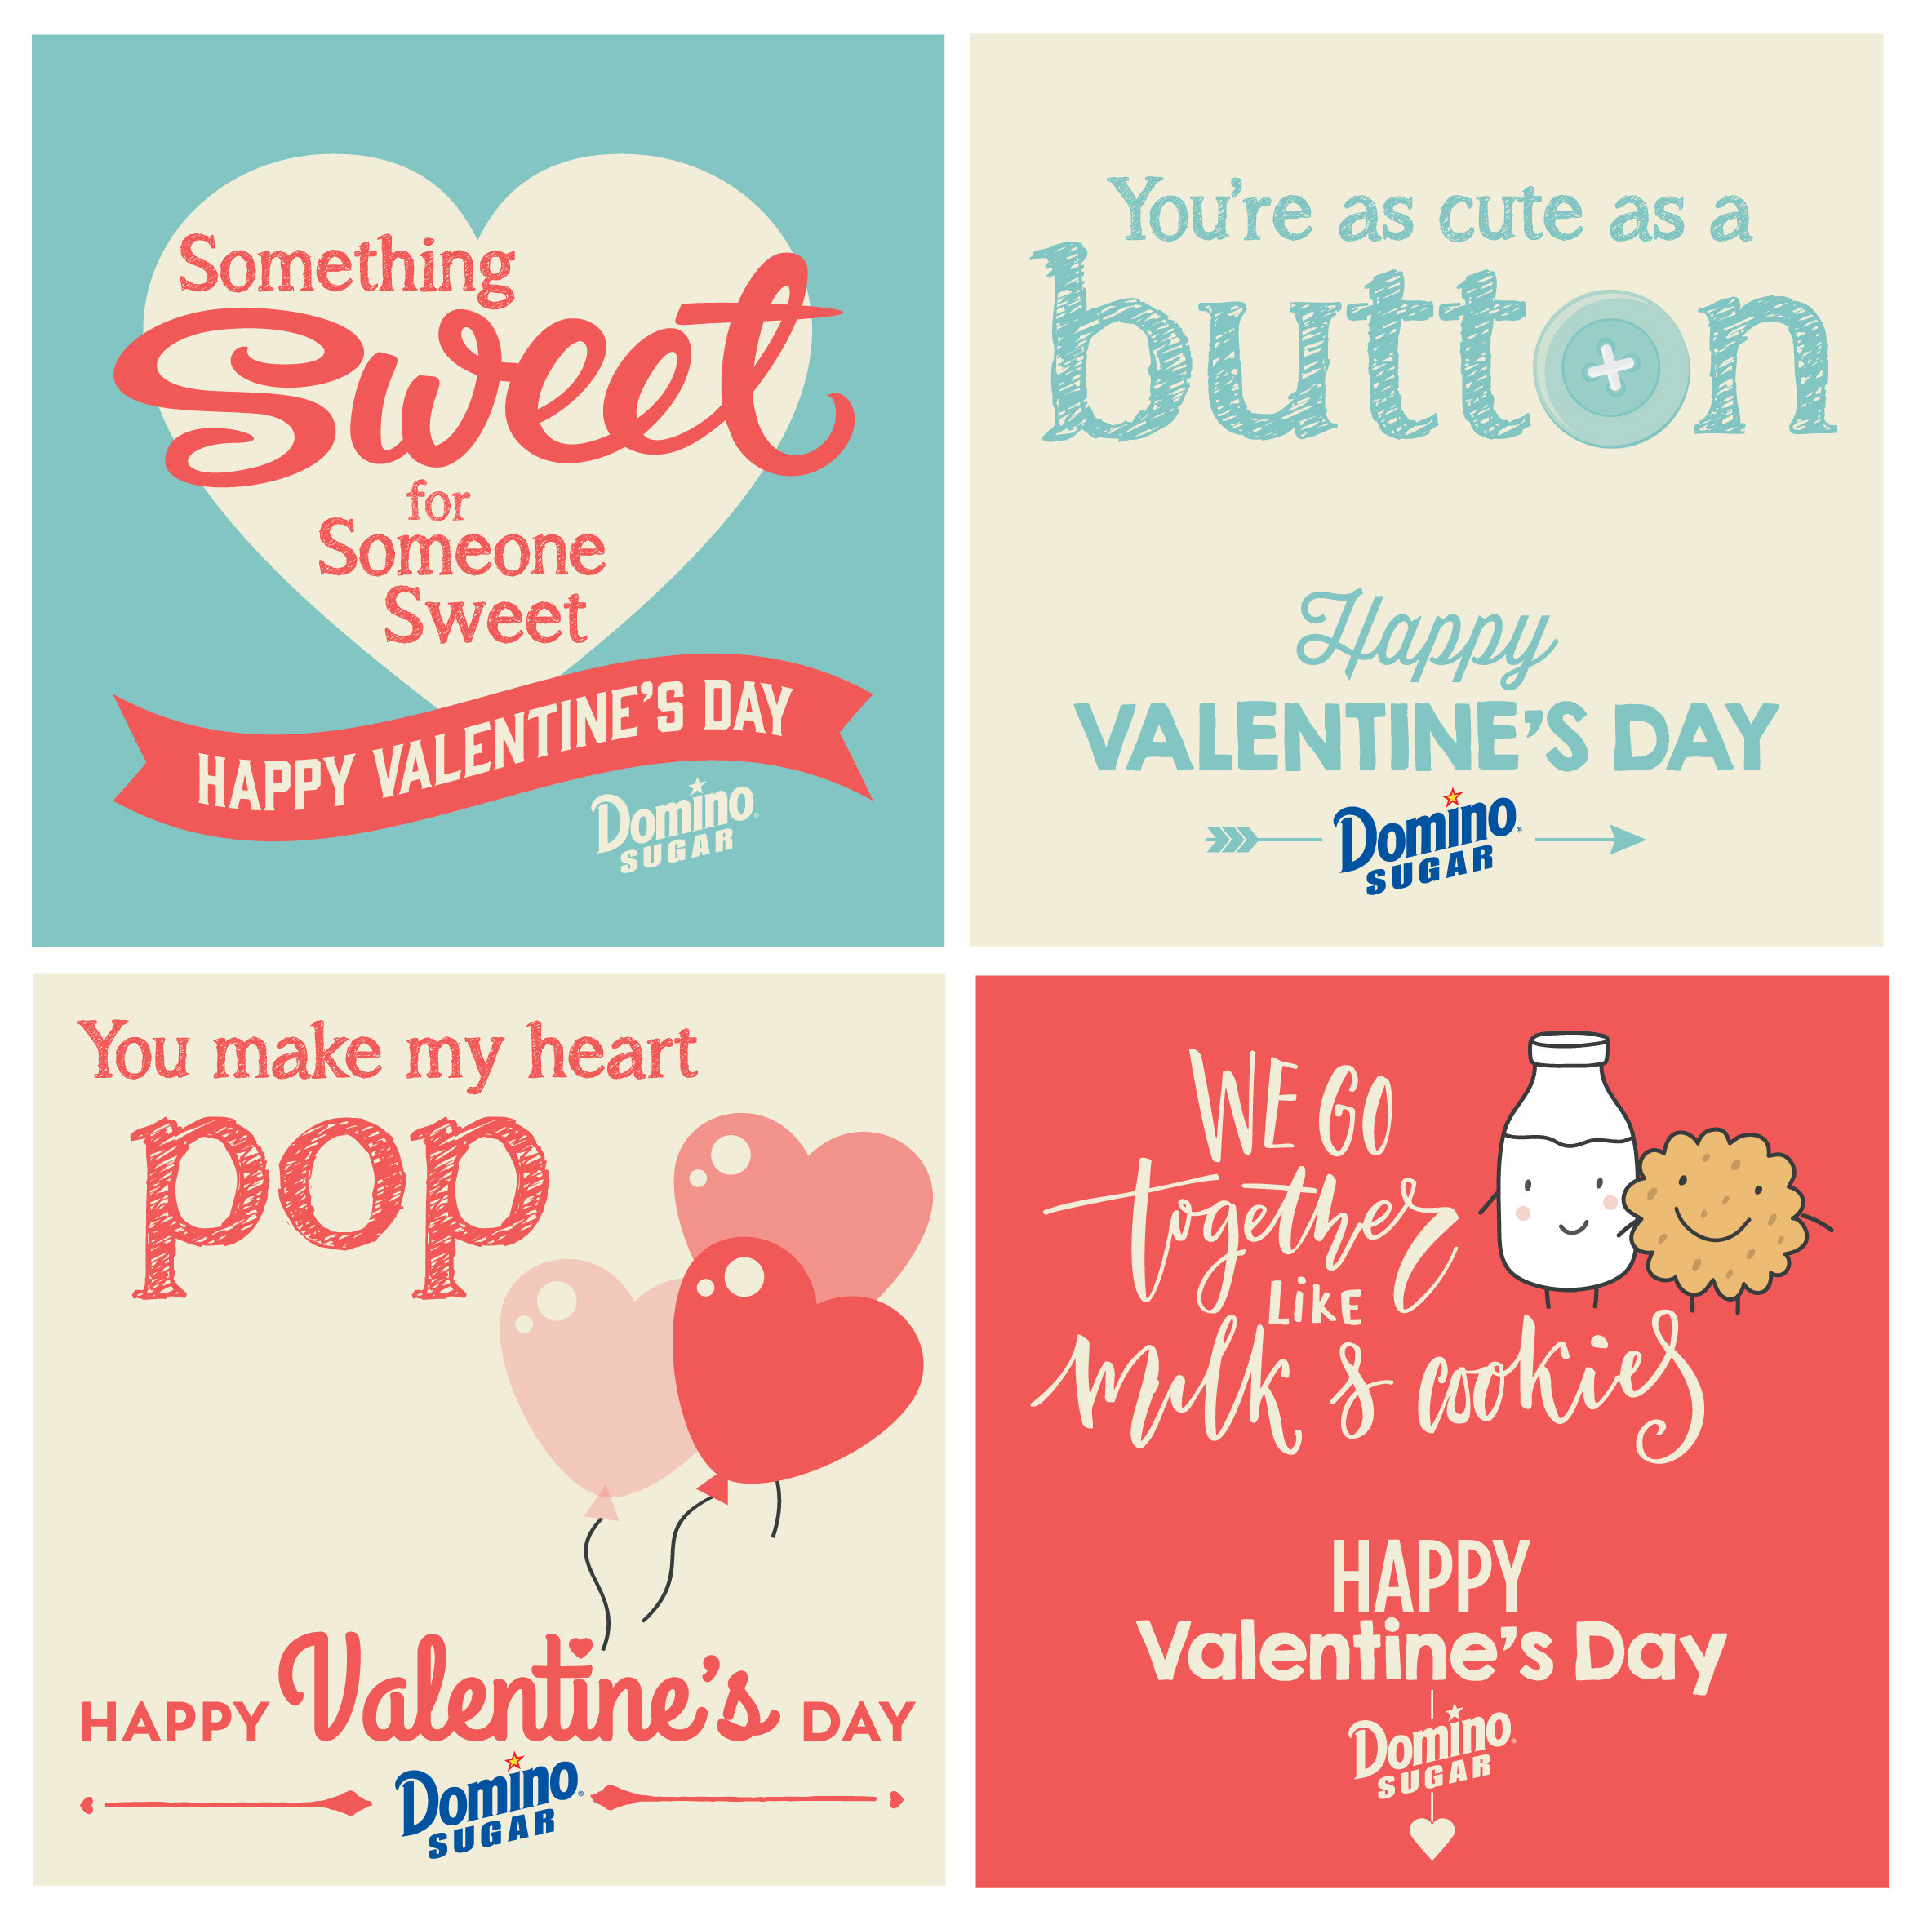 Valentines Day Card With Candy
 Valentine s Day Cards & Candy Treats